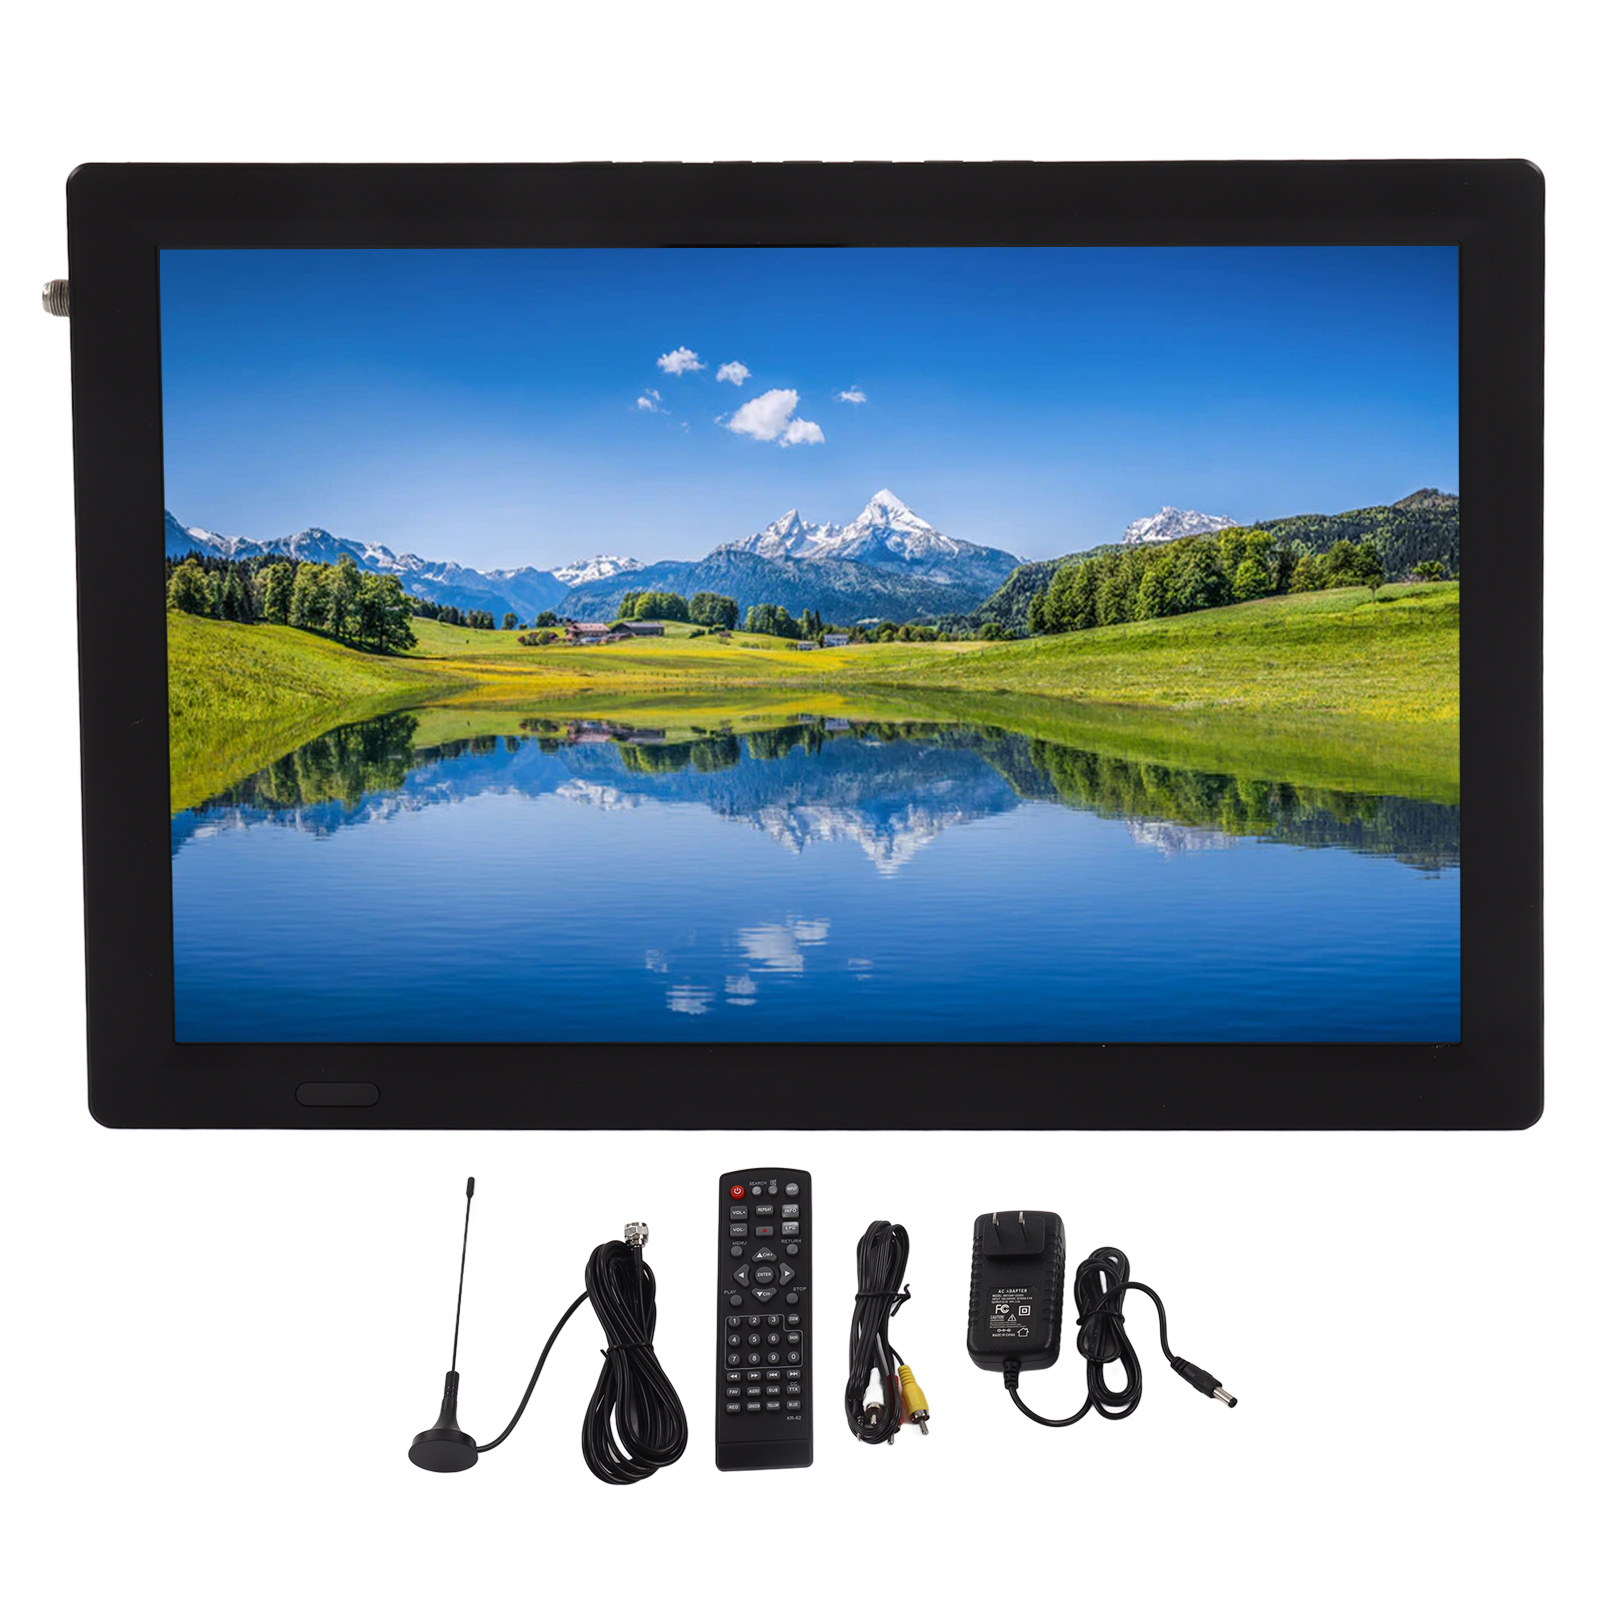 14 Inch Portable Tv Portable Tv Lcd Monitor Rechargeable Portable Tv 14 Inch Portable Digital LED TV On Screen High Sensitivity Rechargeable TV LCD Monitor With Remote Control - image 5 of 8